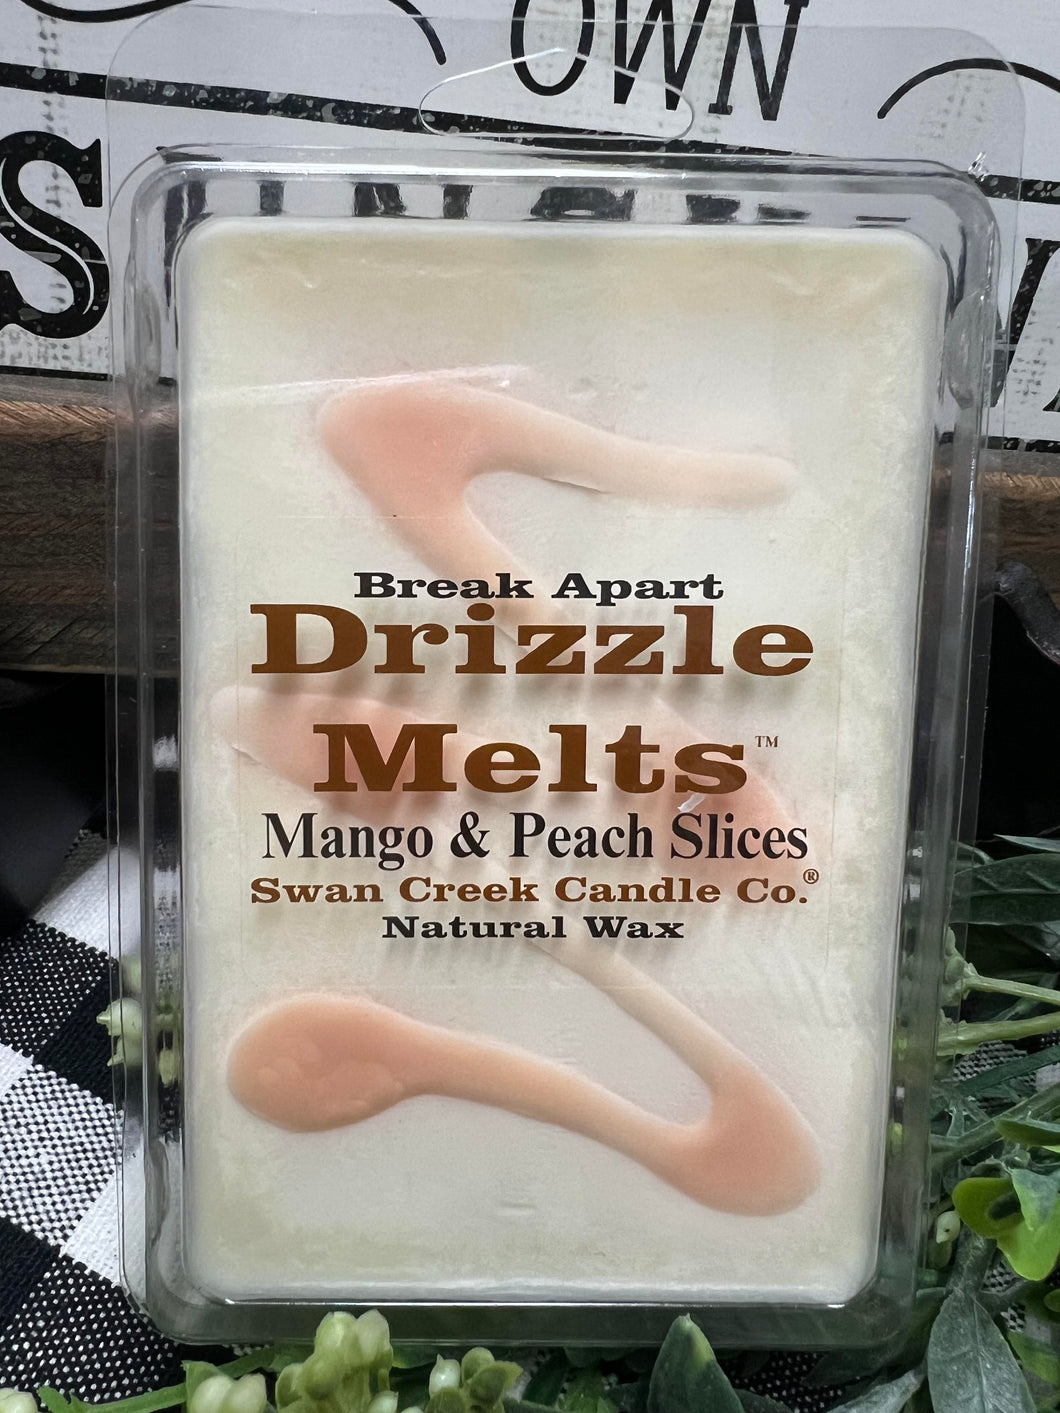 Swan Creek Candle Co. Mango & Peach Slices Drizzle Melts